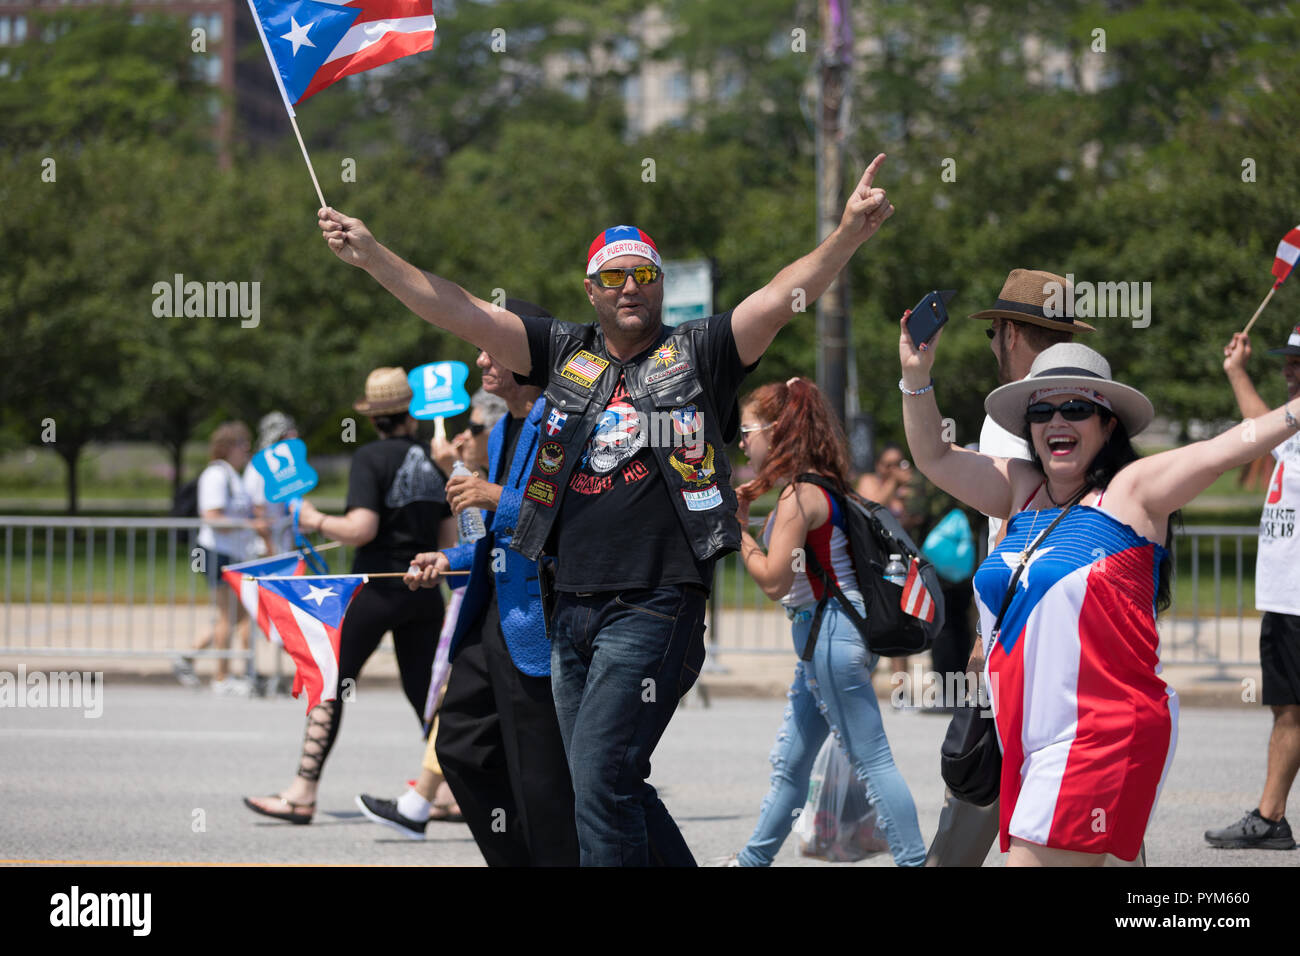 Chicago, Illinois, USA - June 16, 2018: The Puerto Rican Day Parade, Puerto Rican people carrying puerto rican flags celebrating during the parade Stock Photo